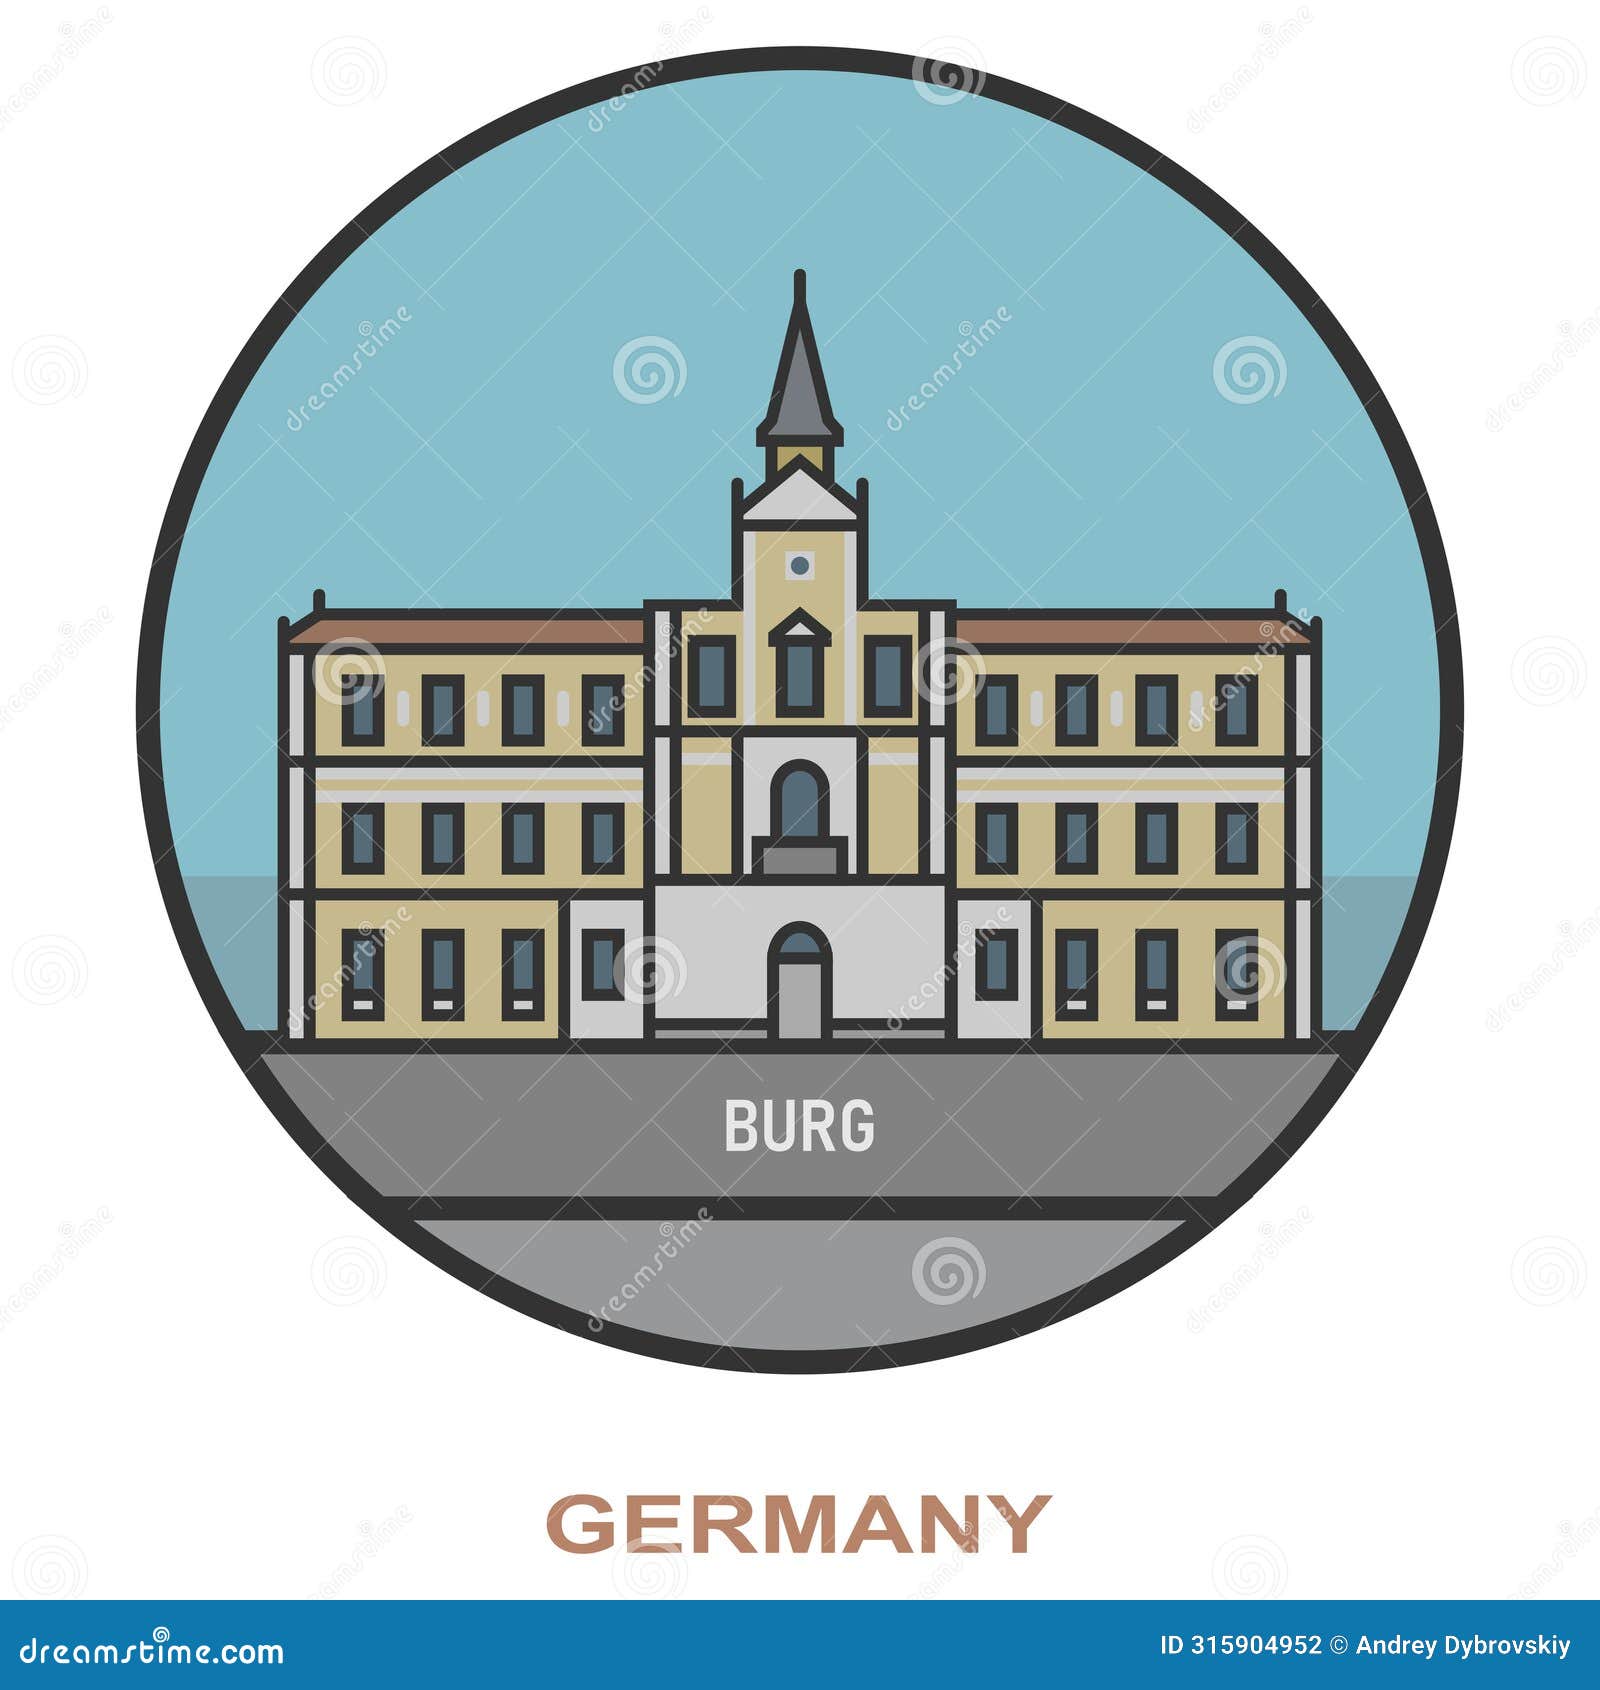 burg. cities and towns in germany